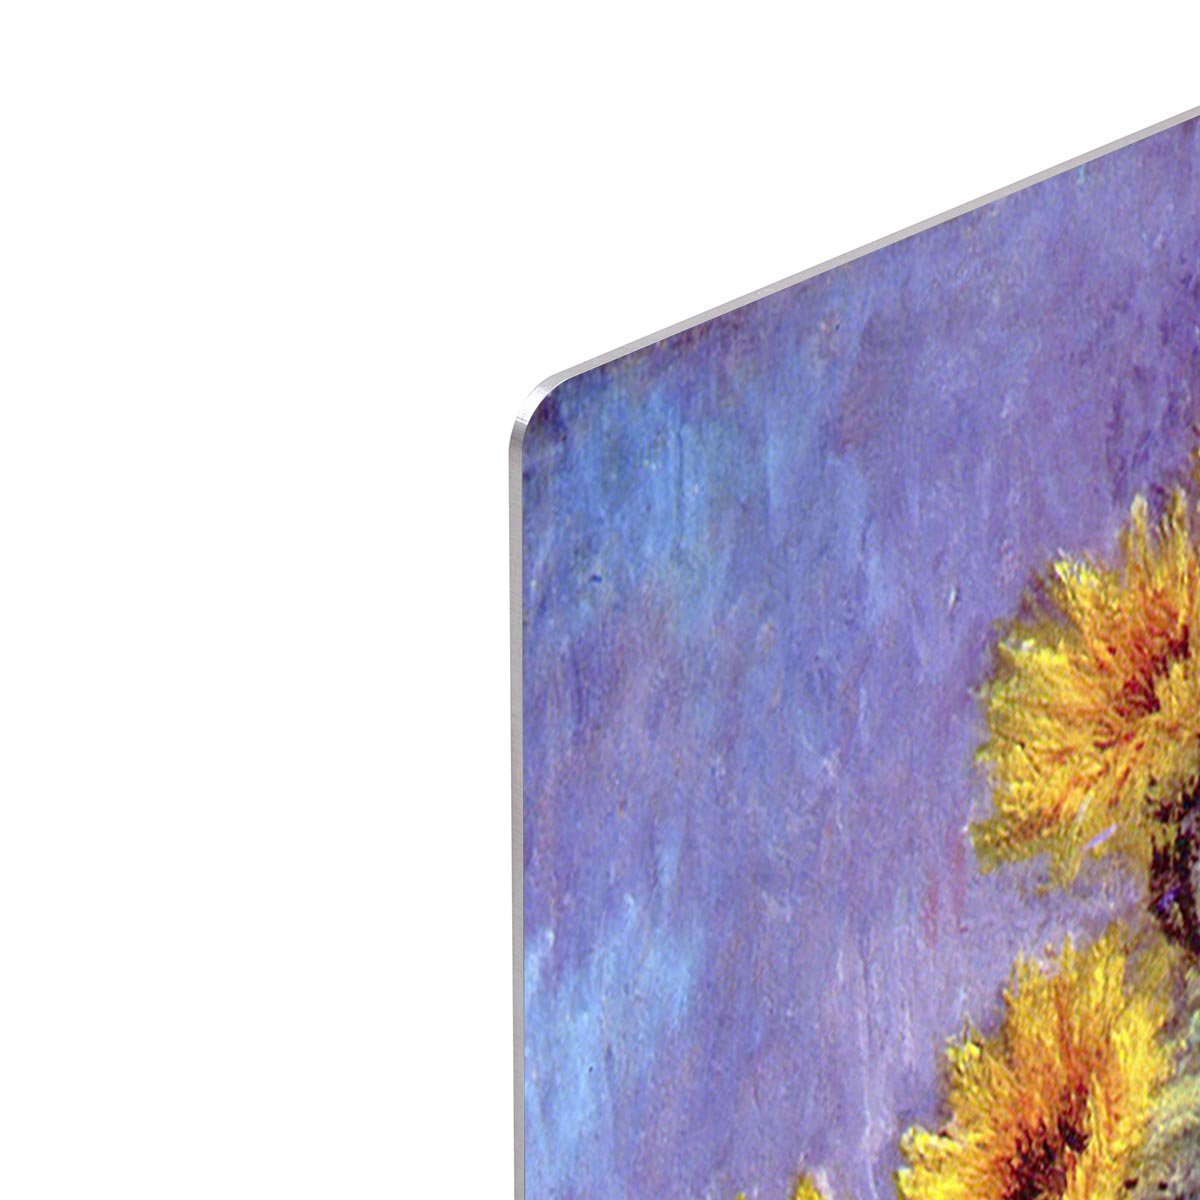 Still Life with Sunflowers by Monet HD Metal Print